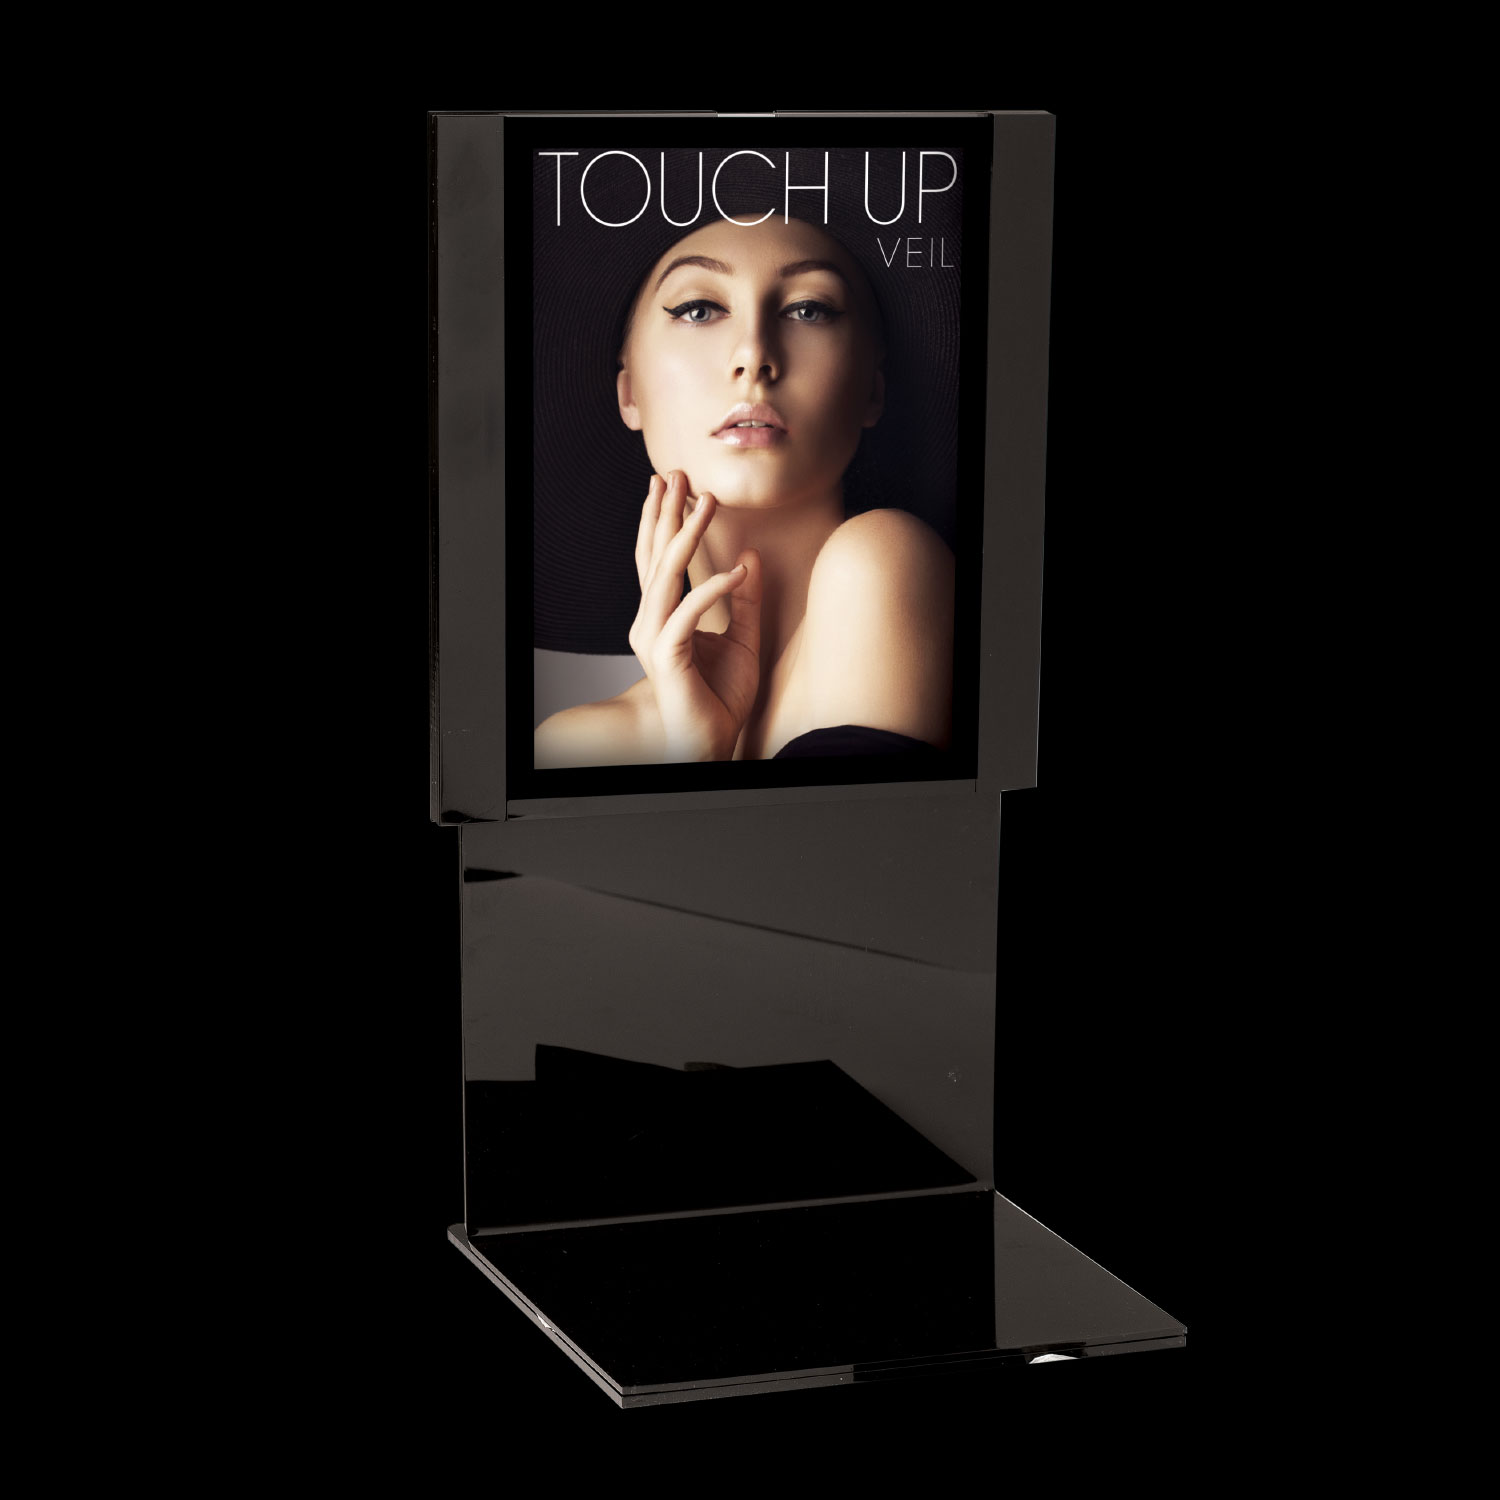 Visionary Sign holders to personalize displays and create an exquisite retail environment